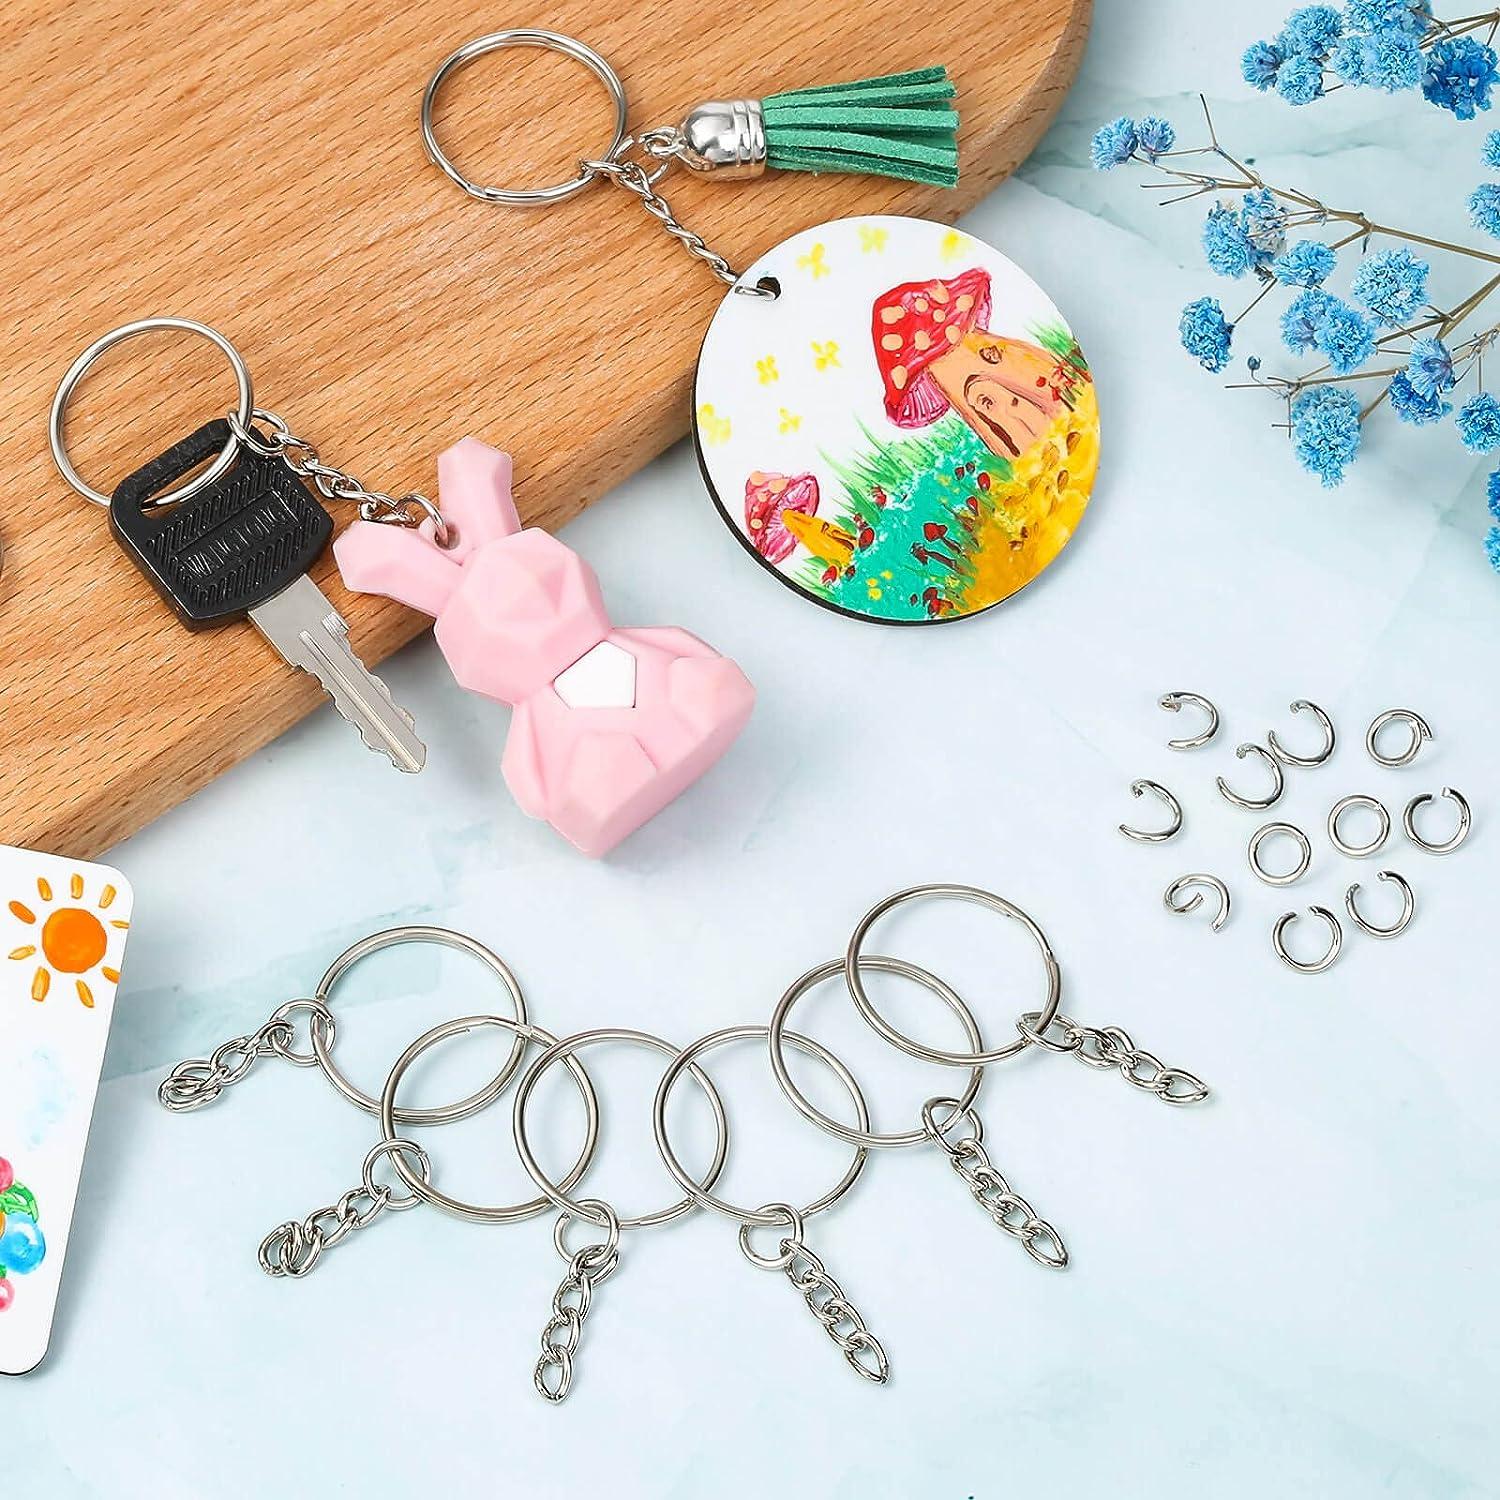 Keychain Making Supplies Paxcoo 50Pcs Keychains with Chain and 50